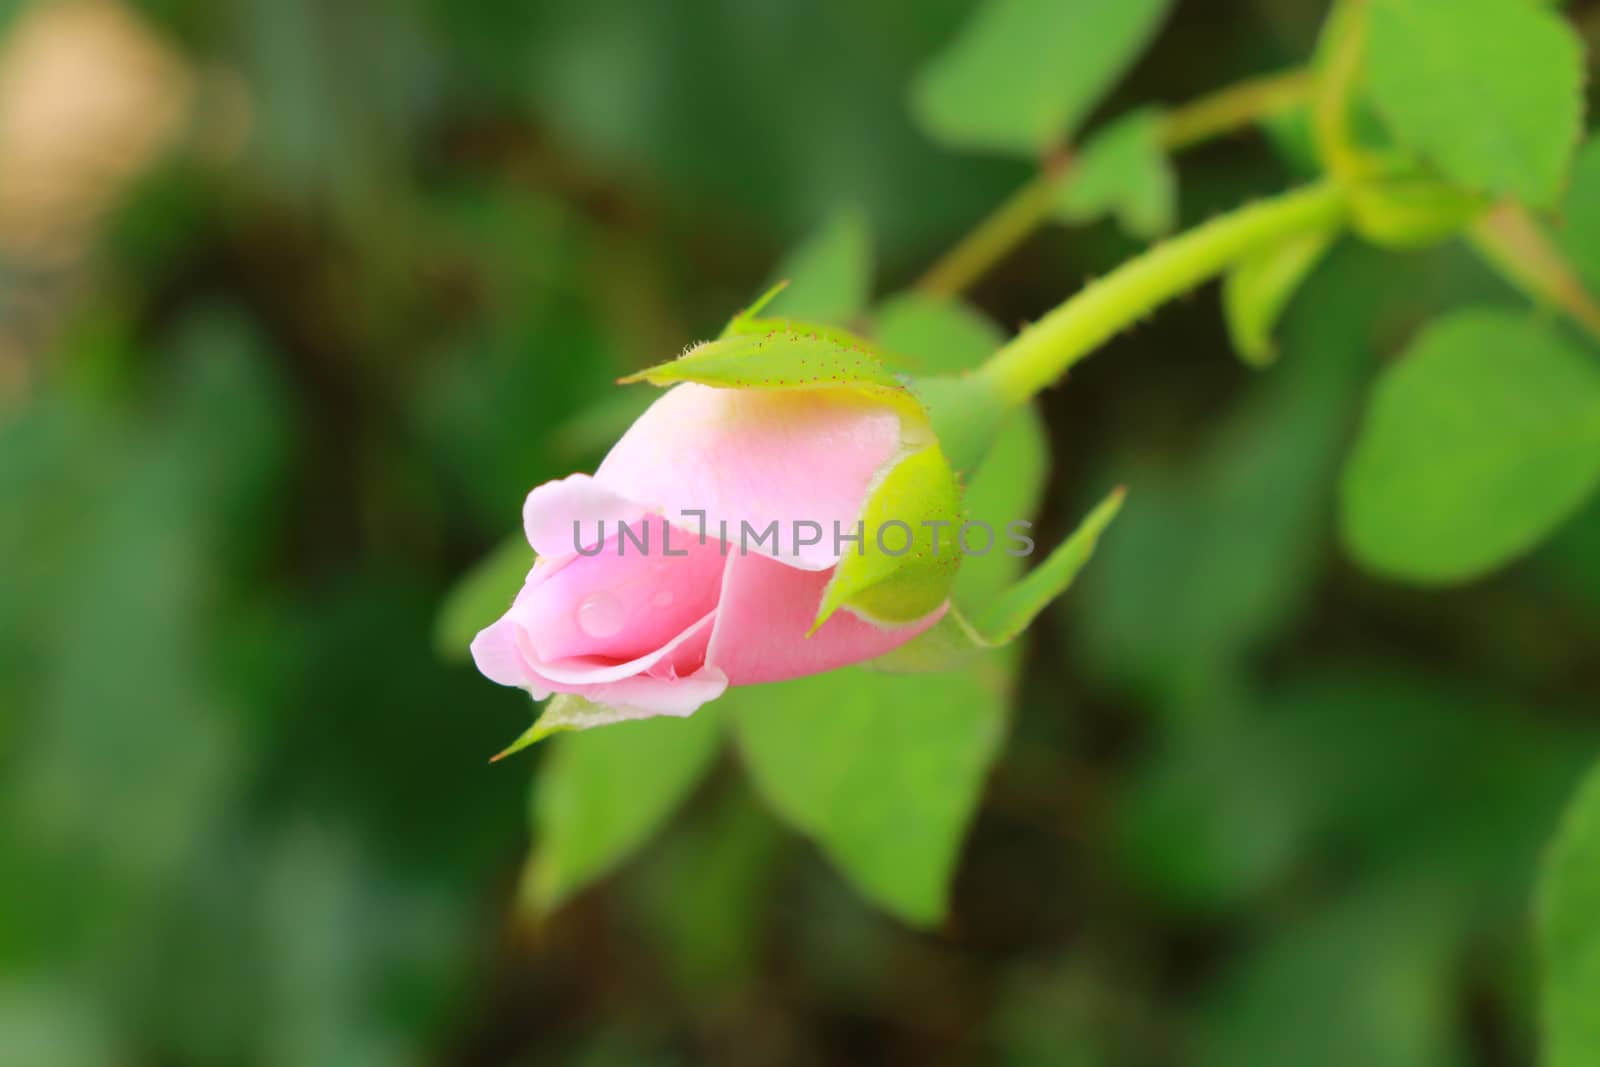 The furl pink rose which have drops on the petal.